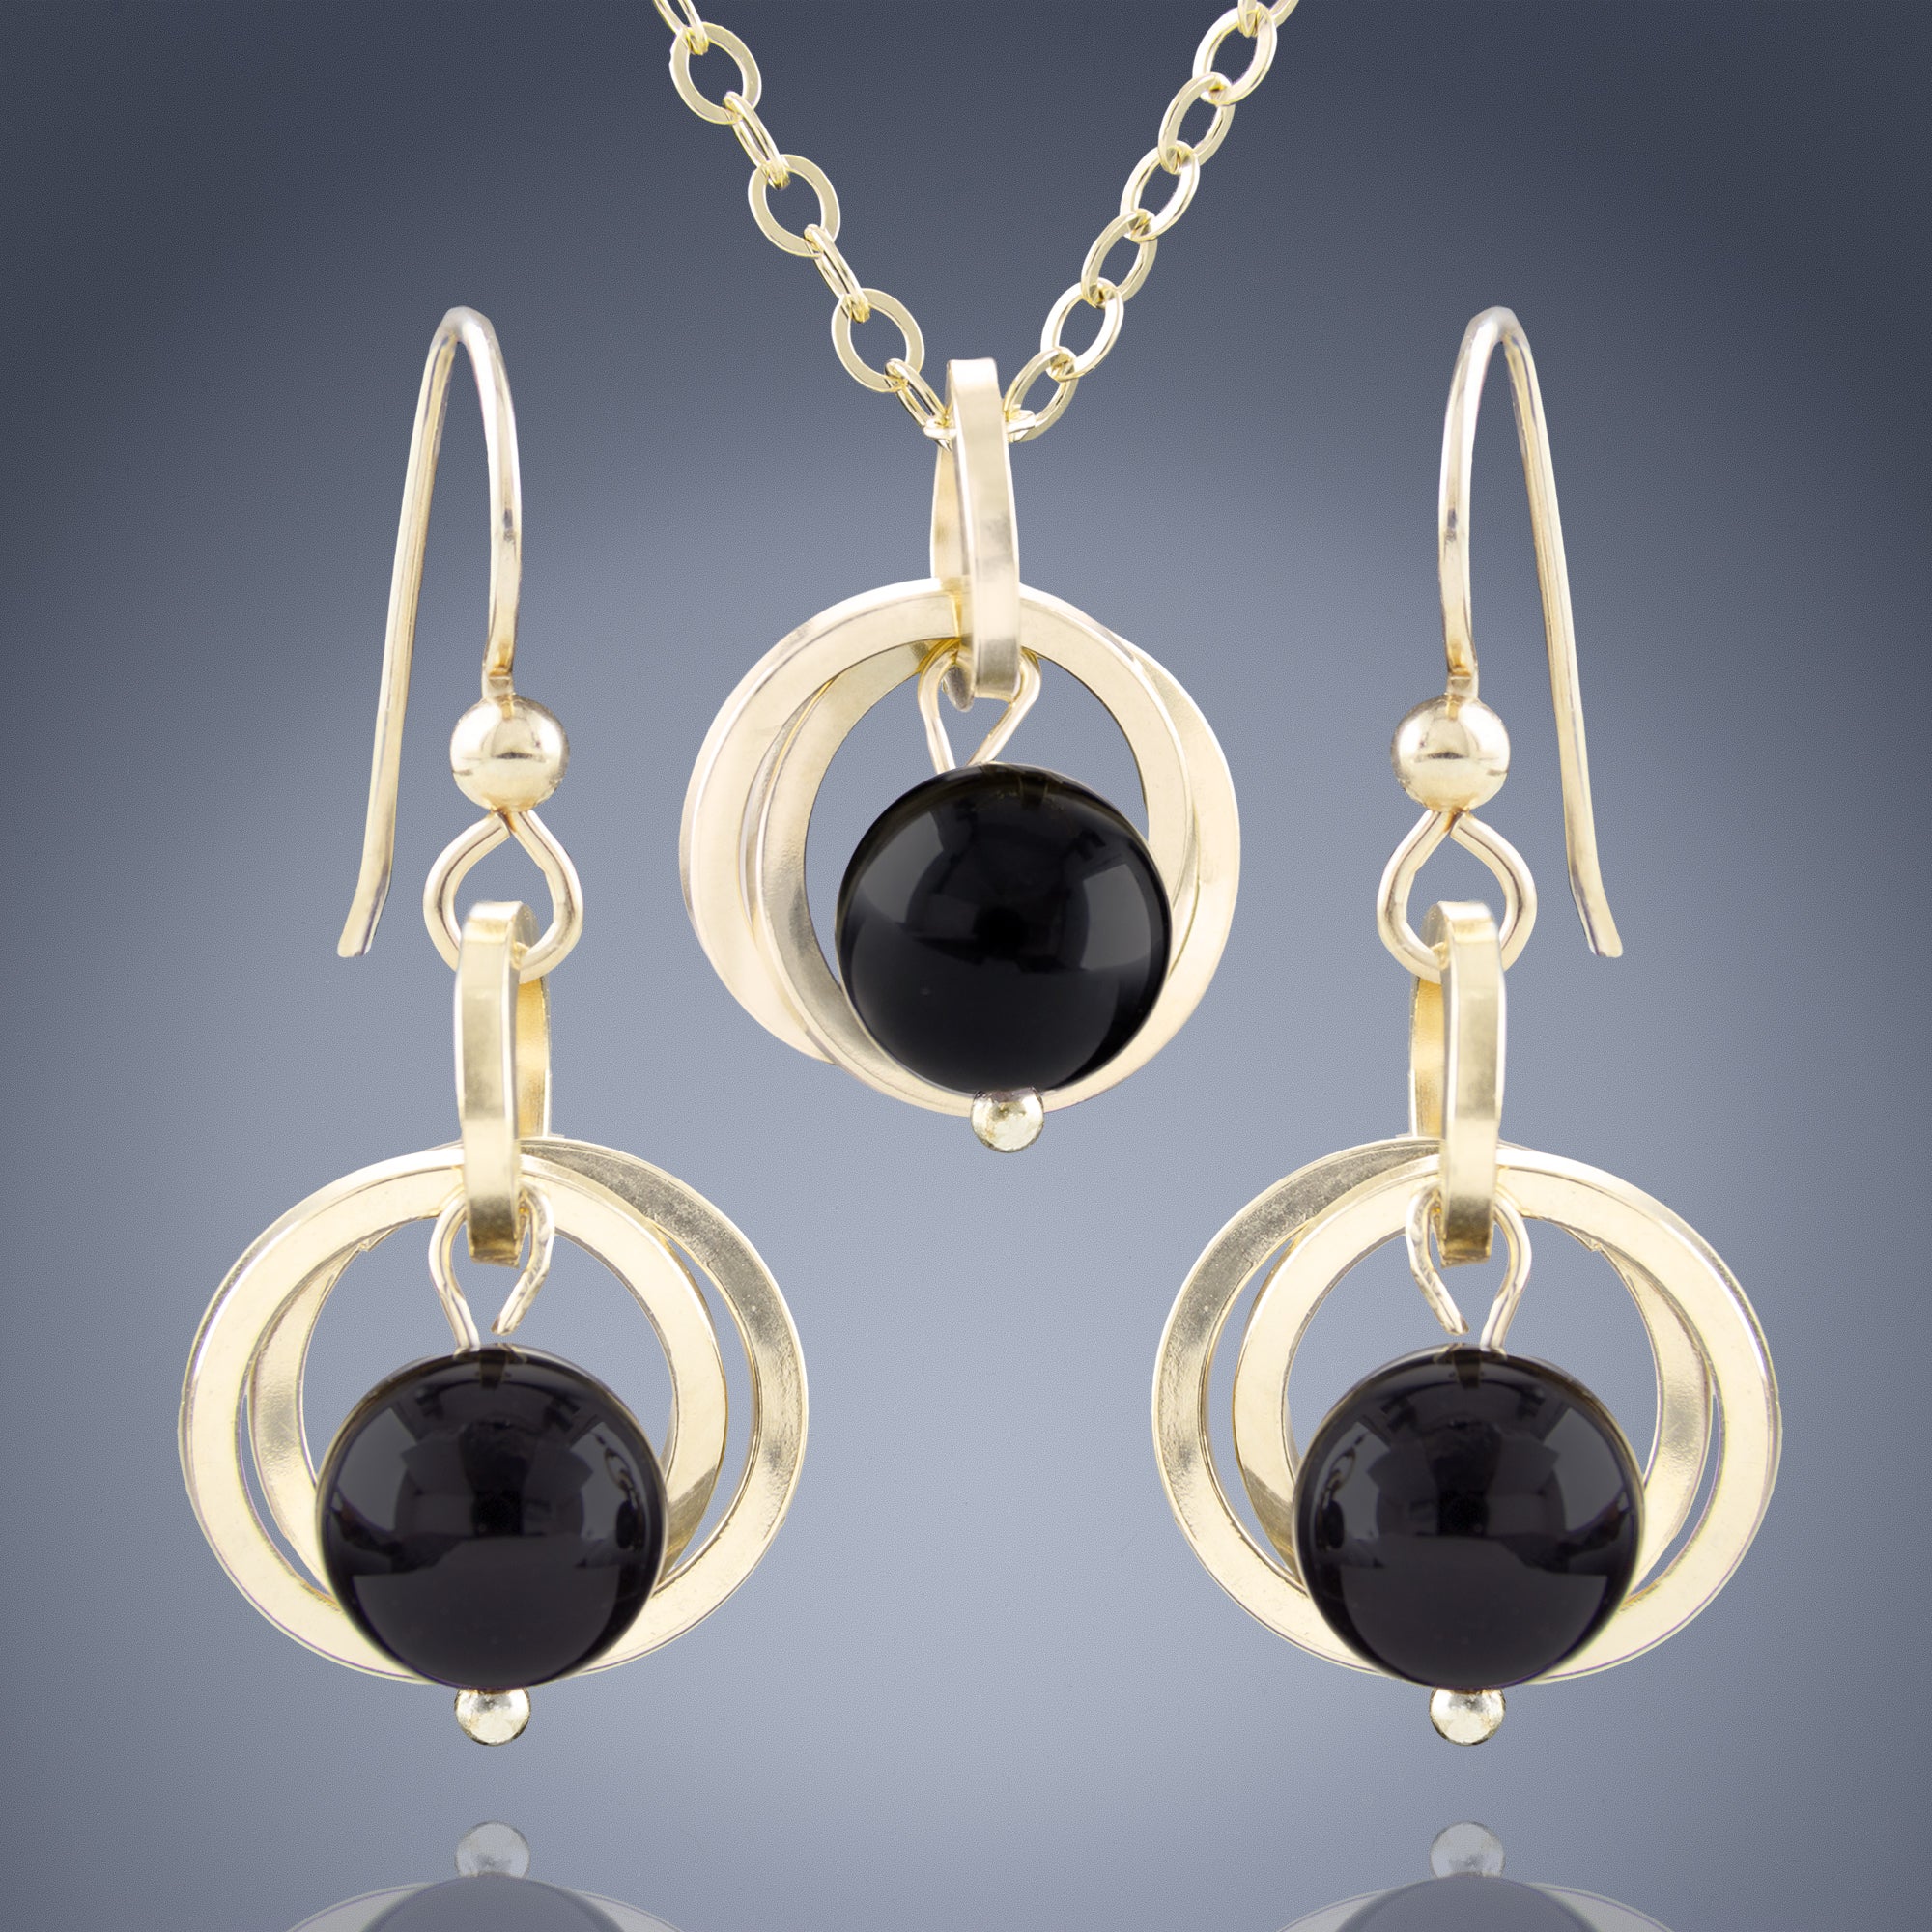 Black Onyx Gemstone Jewelry Gift Set with Dangle Earrings and Pendant Necklace in 14K Gold Fill